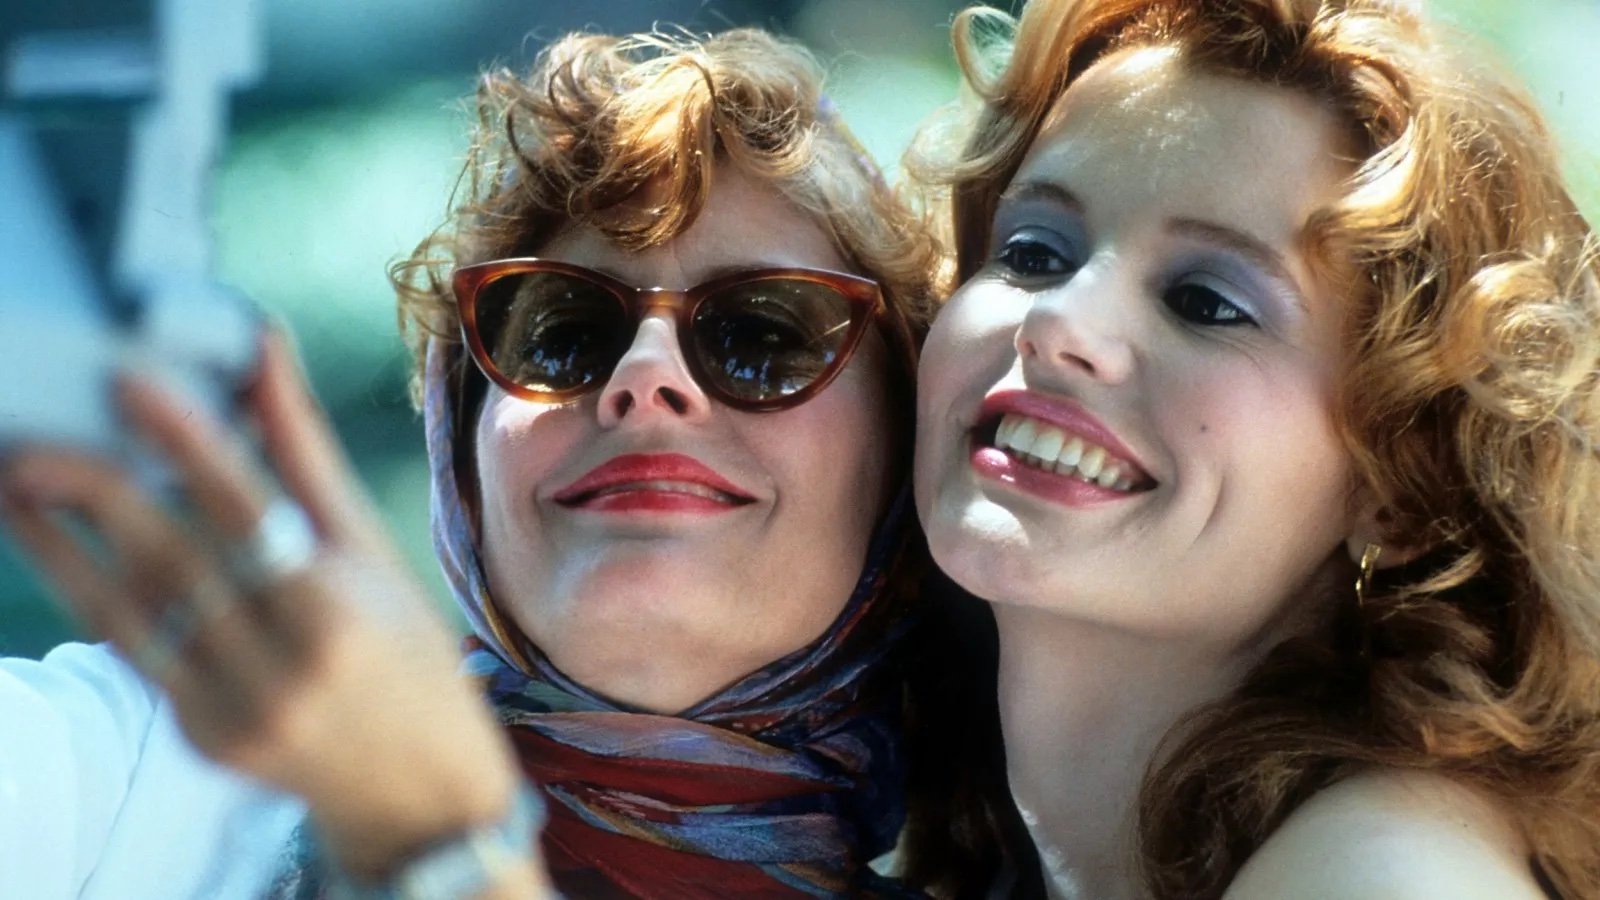 Two women smile take a polaroid of themselves, both wearing makeup, the one on the left in sunglasses and kerchief.